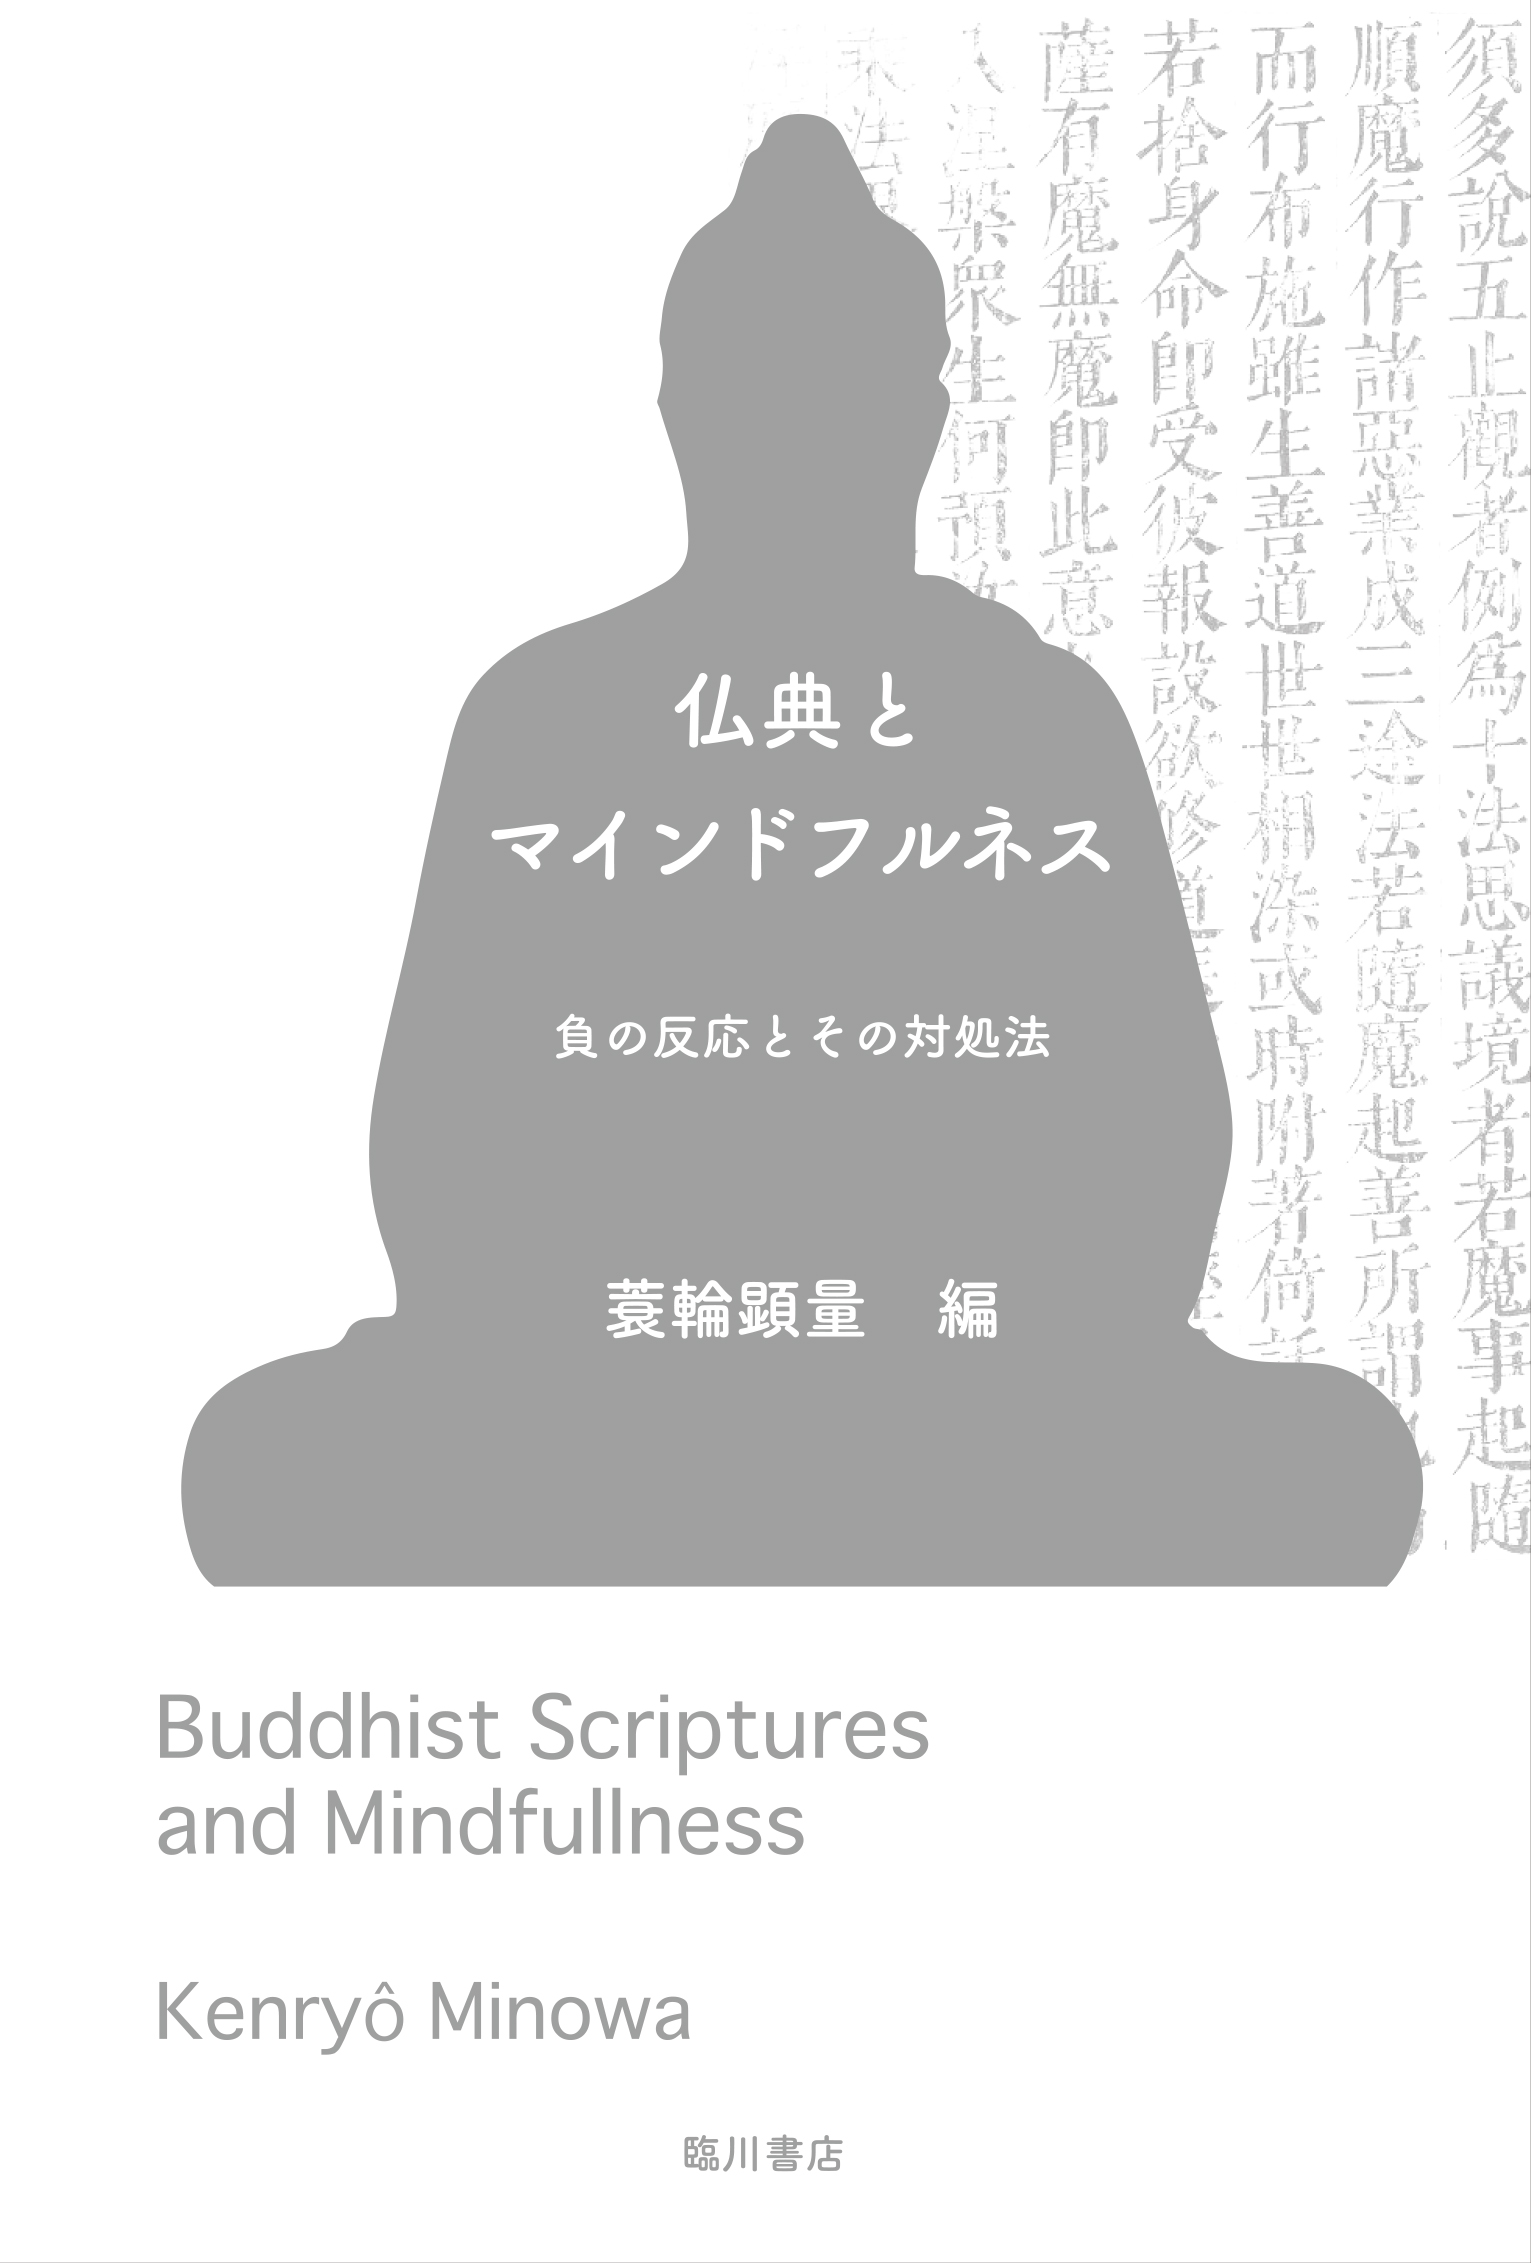 A silhouette of Buddha and Buddhist sutra in grayscale on white cover